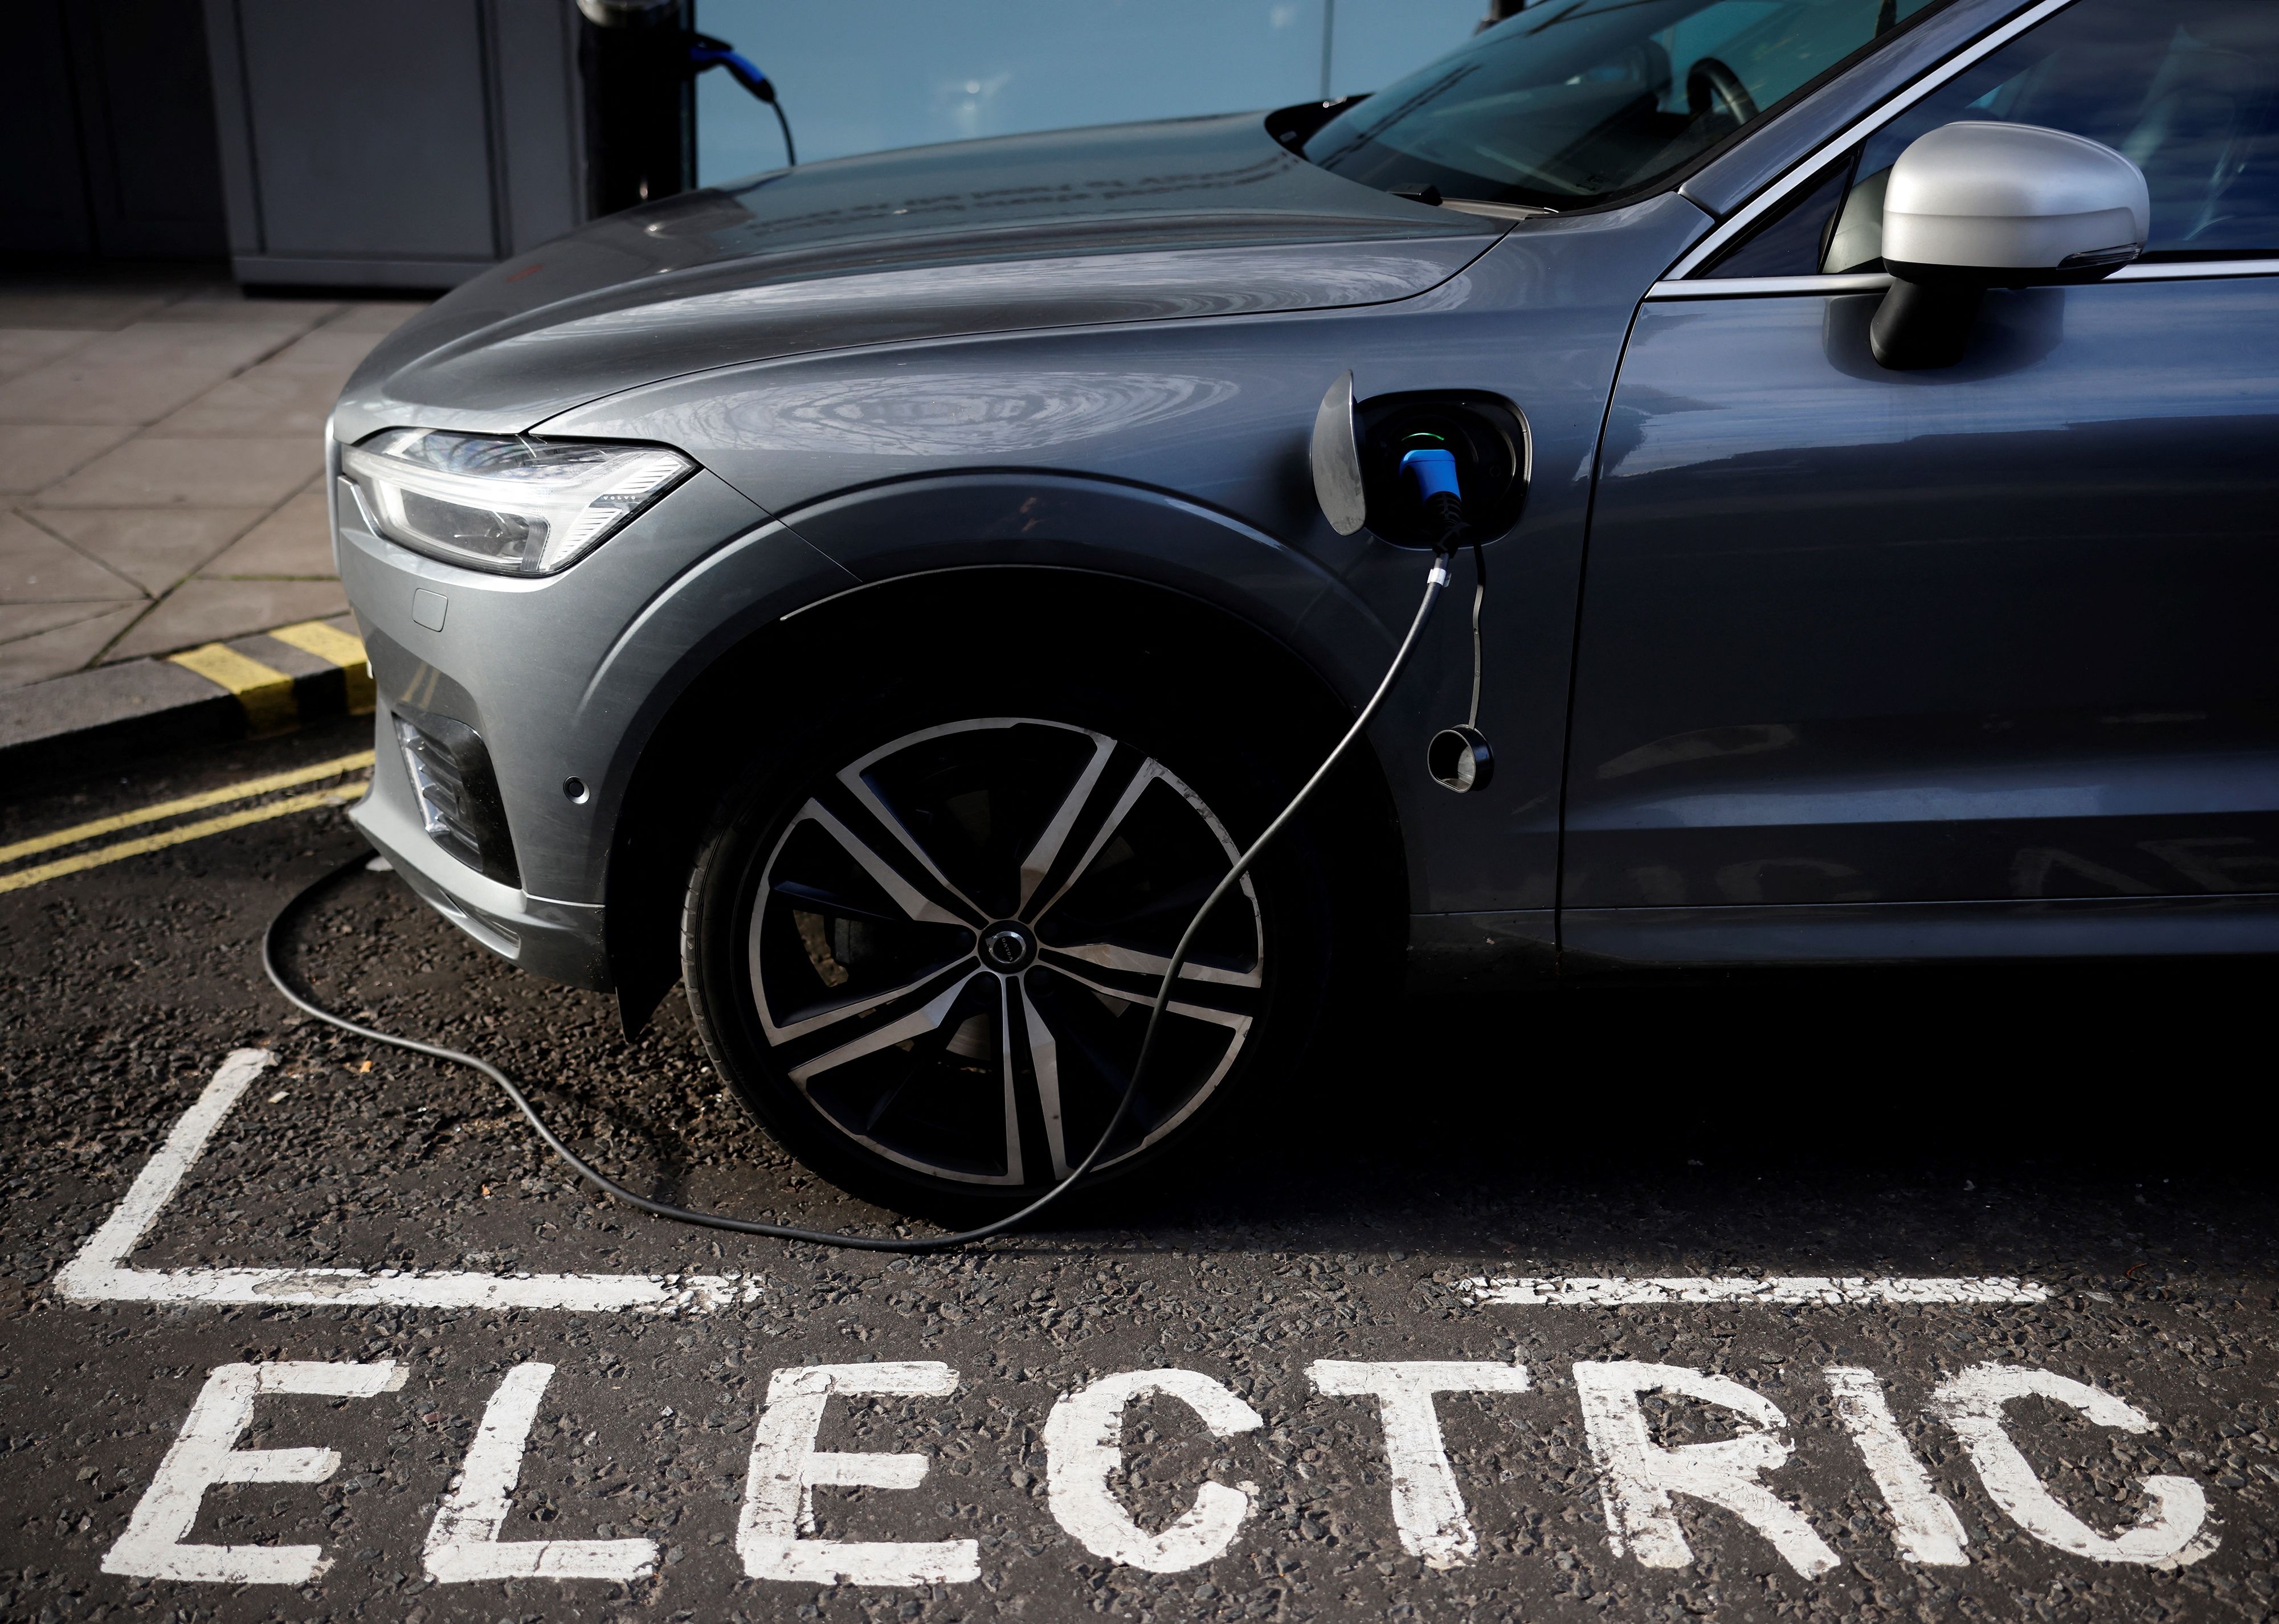 The law comes as it emerged on Tuesday that a government target for EV chargers near motorways had been missed